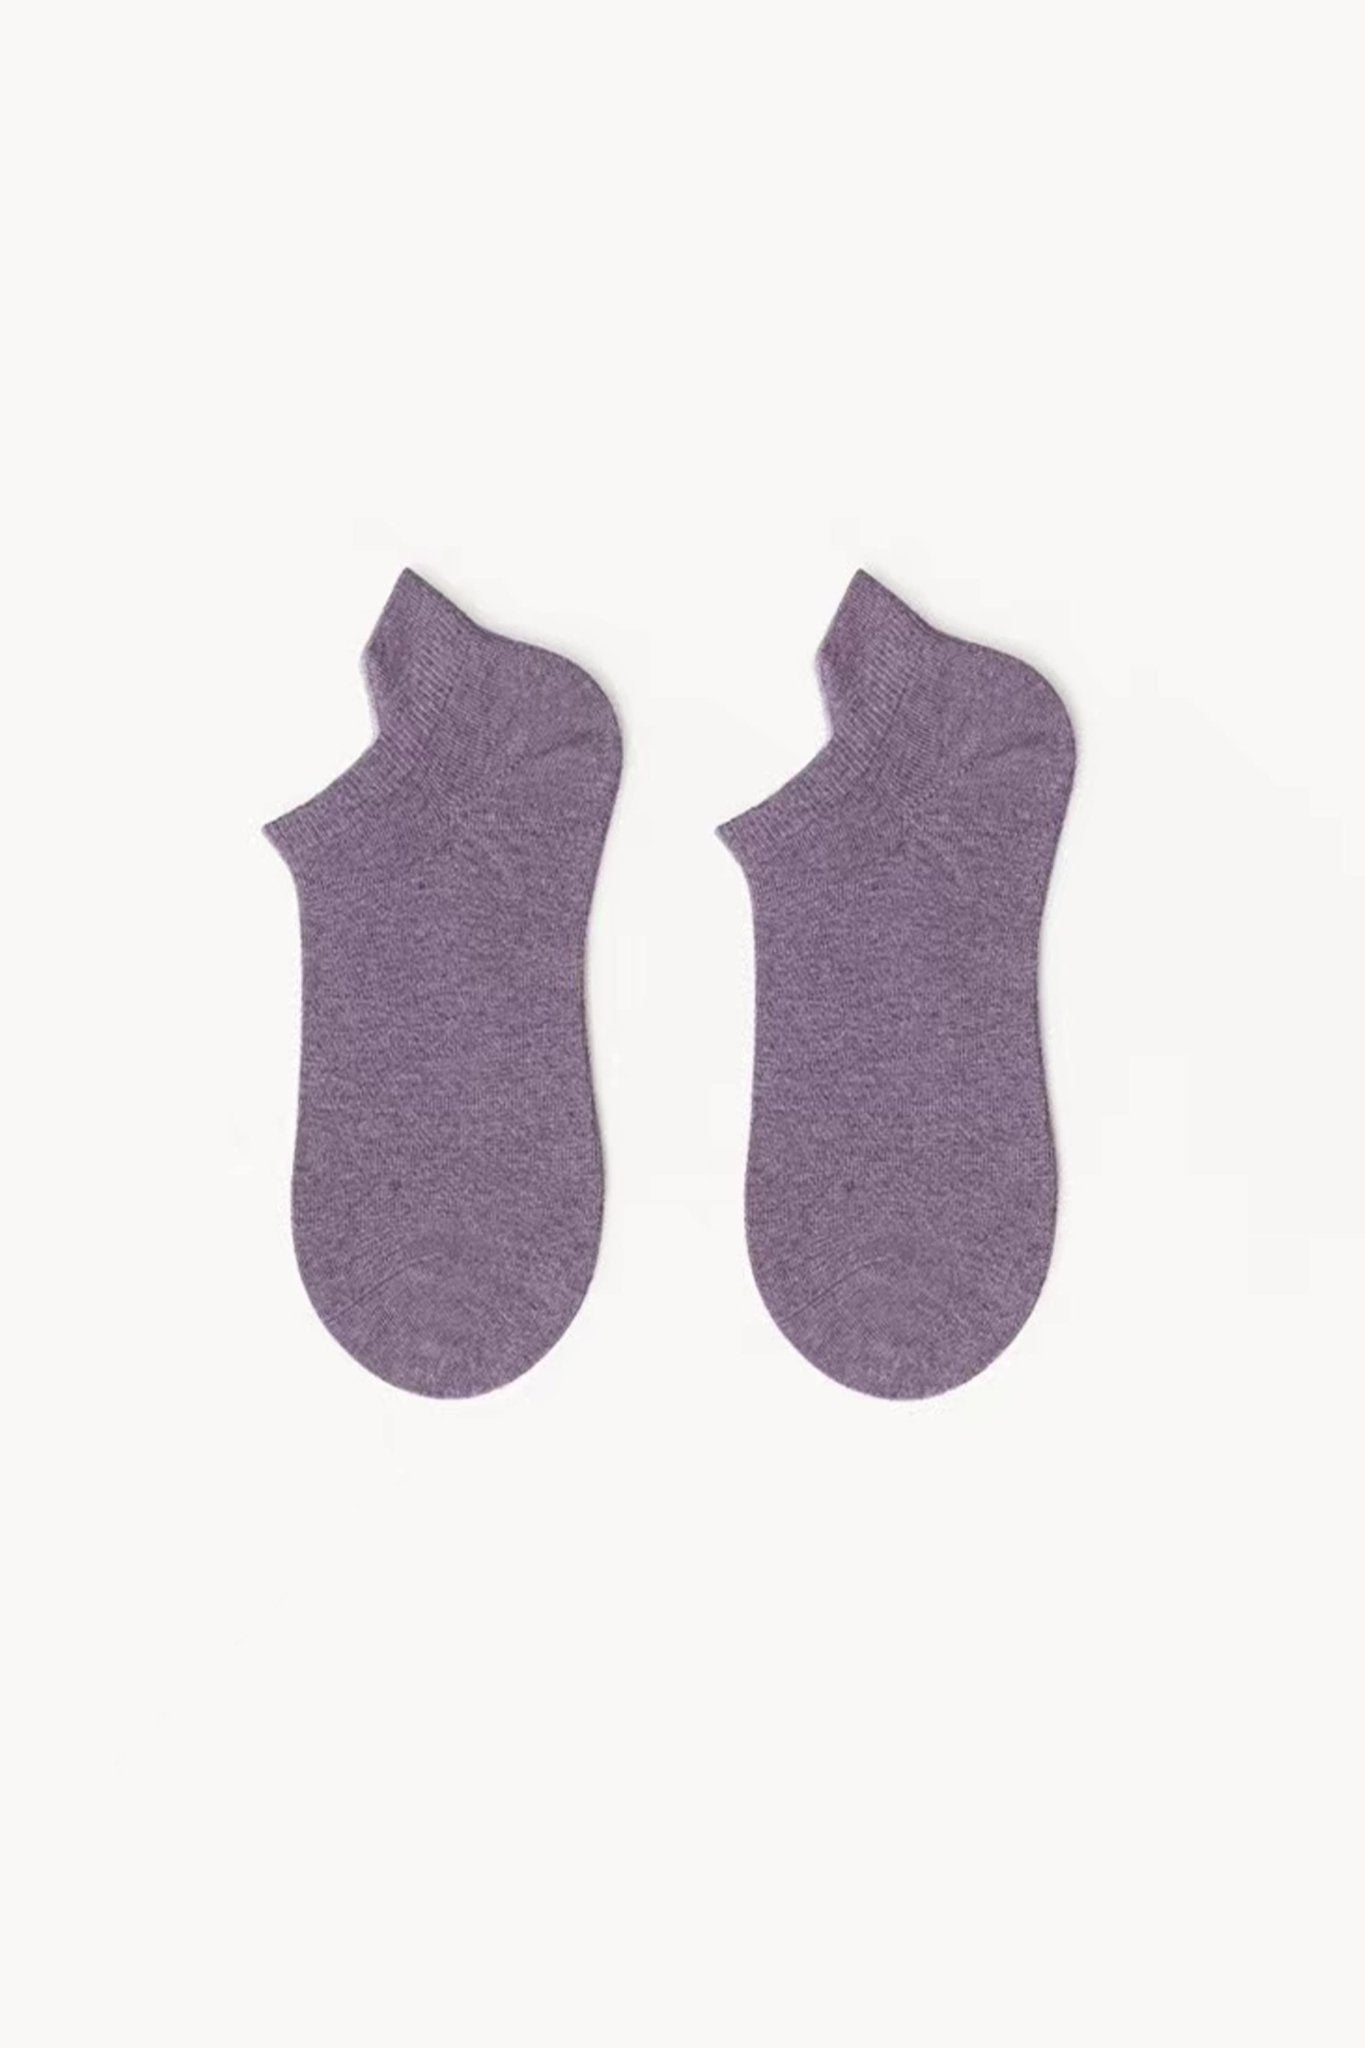 The Four Seasons Socks | Breathe Freely And Absorb Sweat - POSESHE